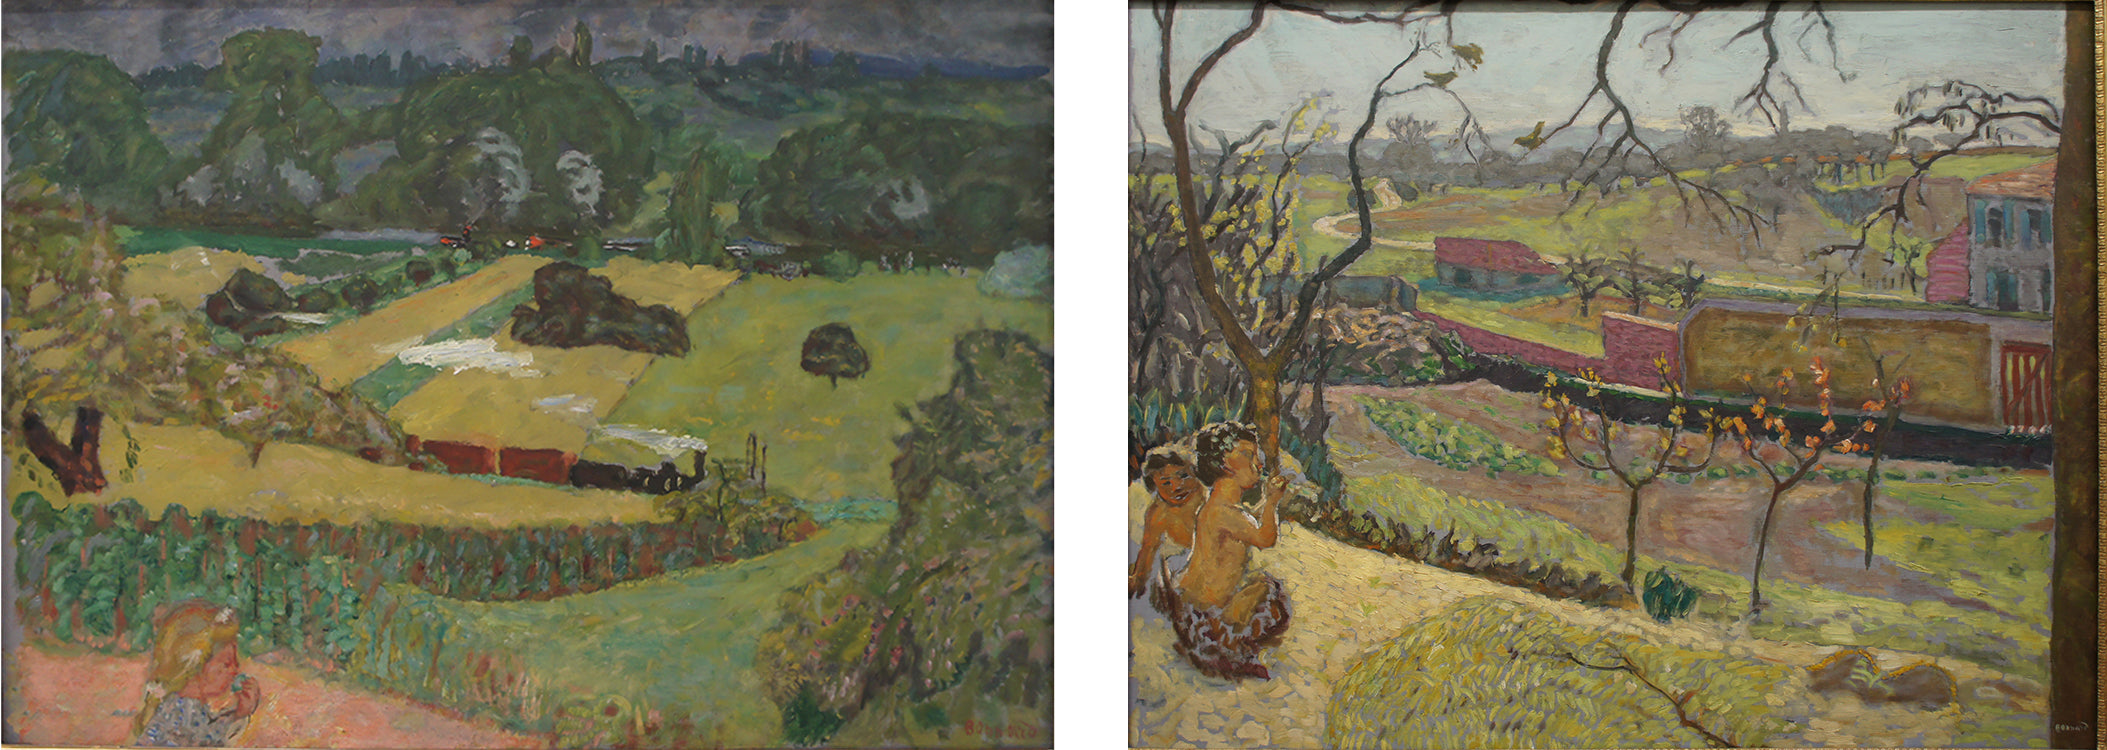 Train and Bardes (left), Early Spring. Little Fauns. (right)